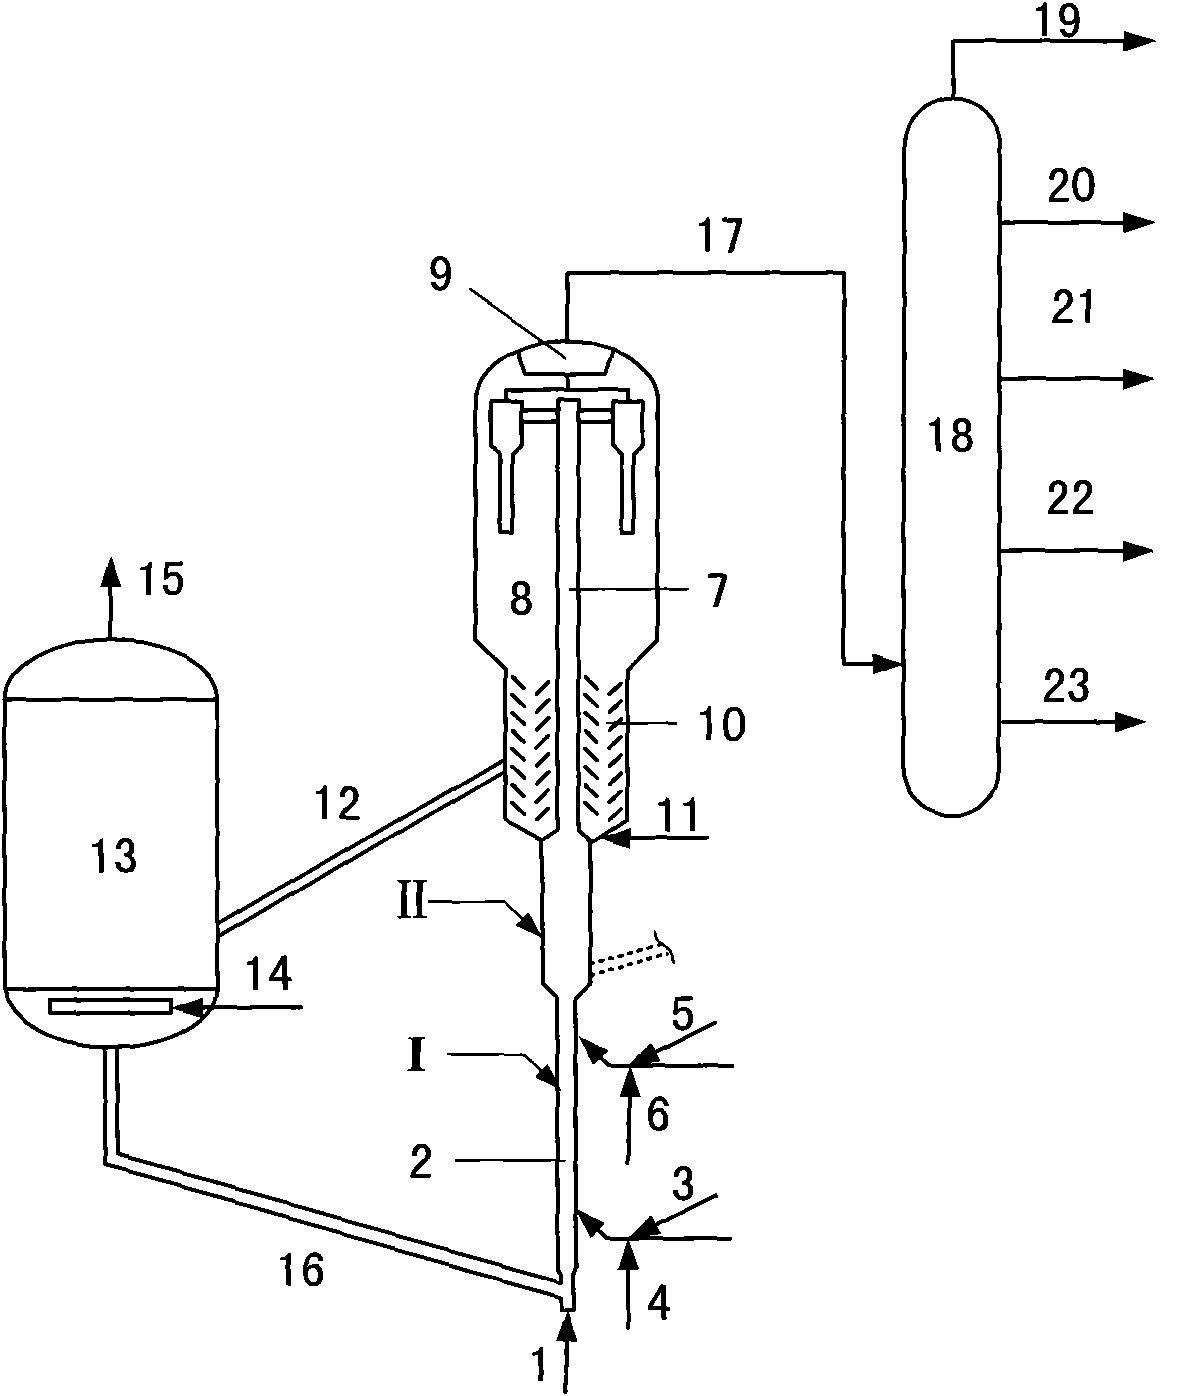 Treatment method for improving selectivity of catalytic cracking catalyst